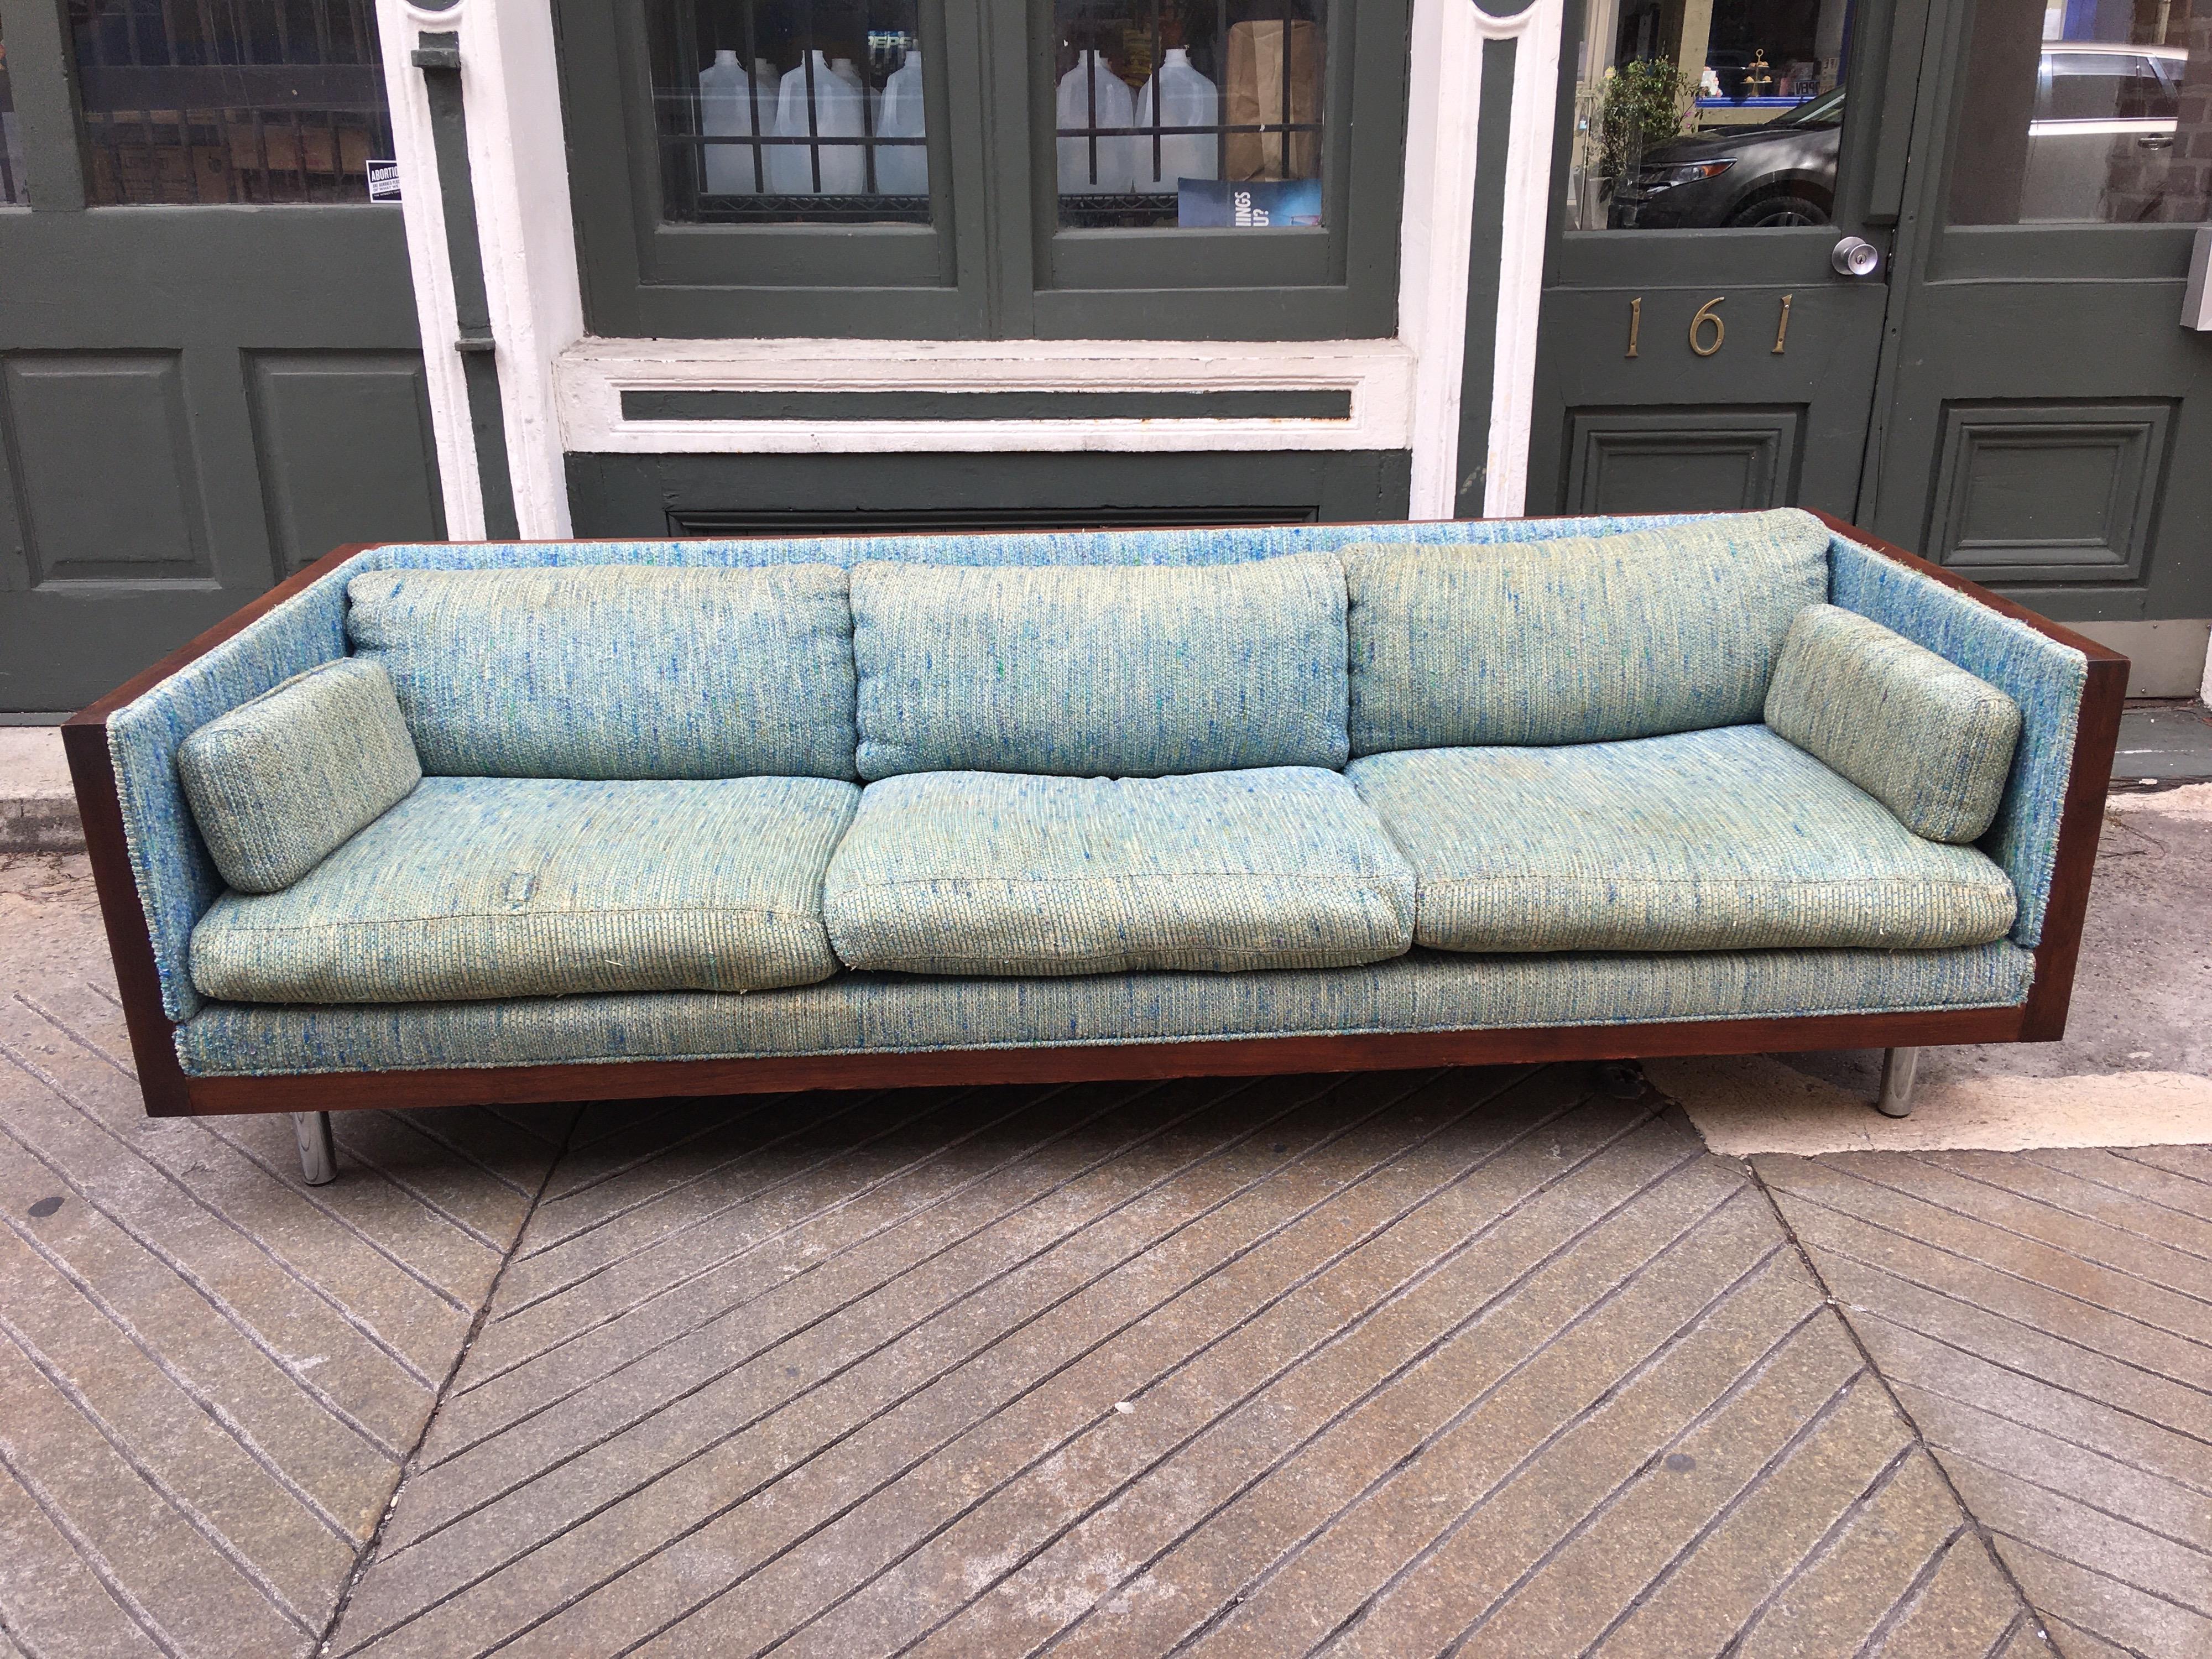 Walnut shell floating sofa by Charlton. Walnut shell sits up on 4 chrome round feet. You choose your fabric and we will do the rest! Price is for sofa redone in your fabric!